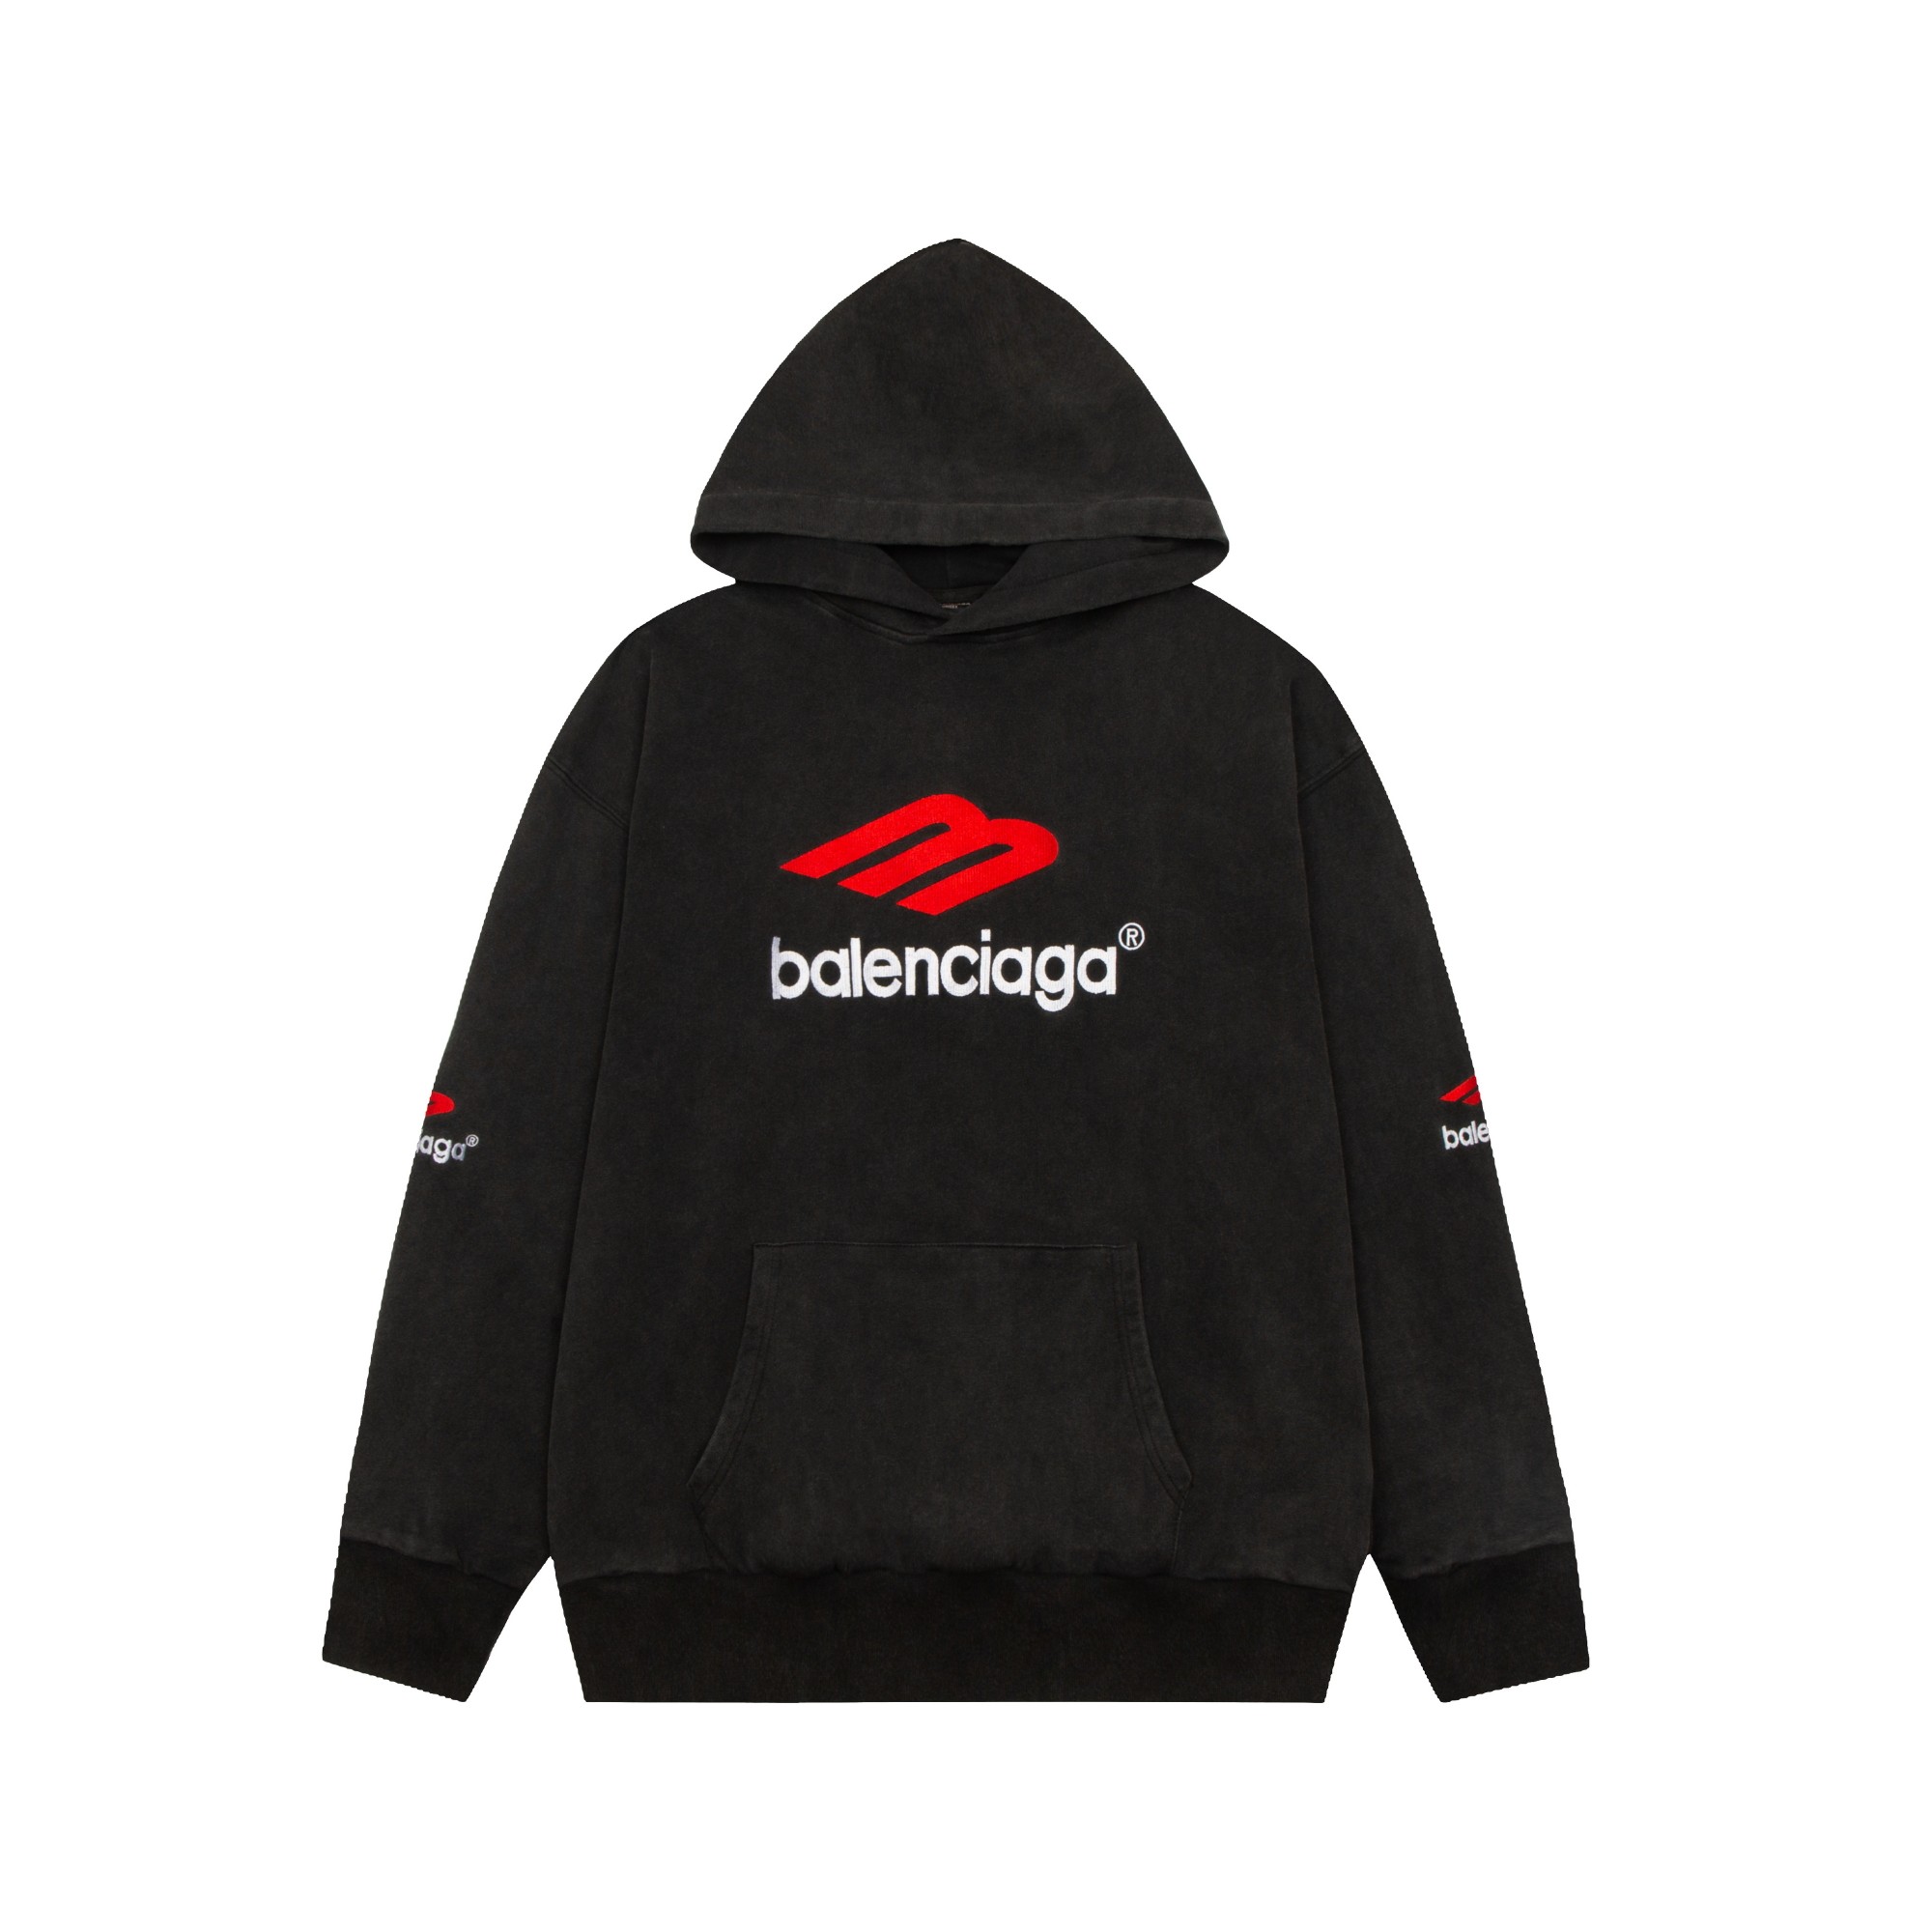 Balenciaga Clothing Hoodies Embroidery Unisex Cotton Hooded Top